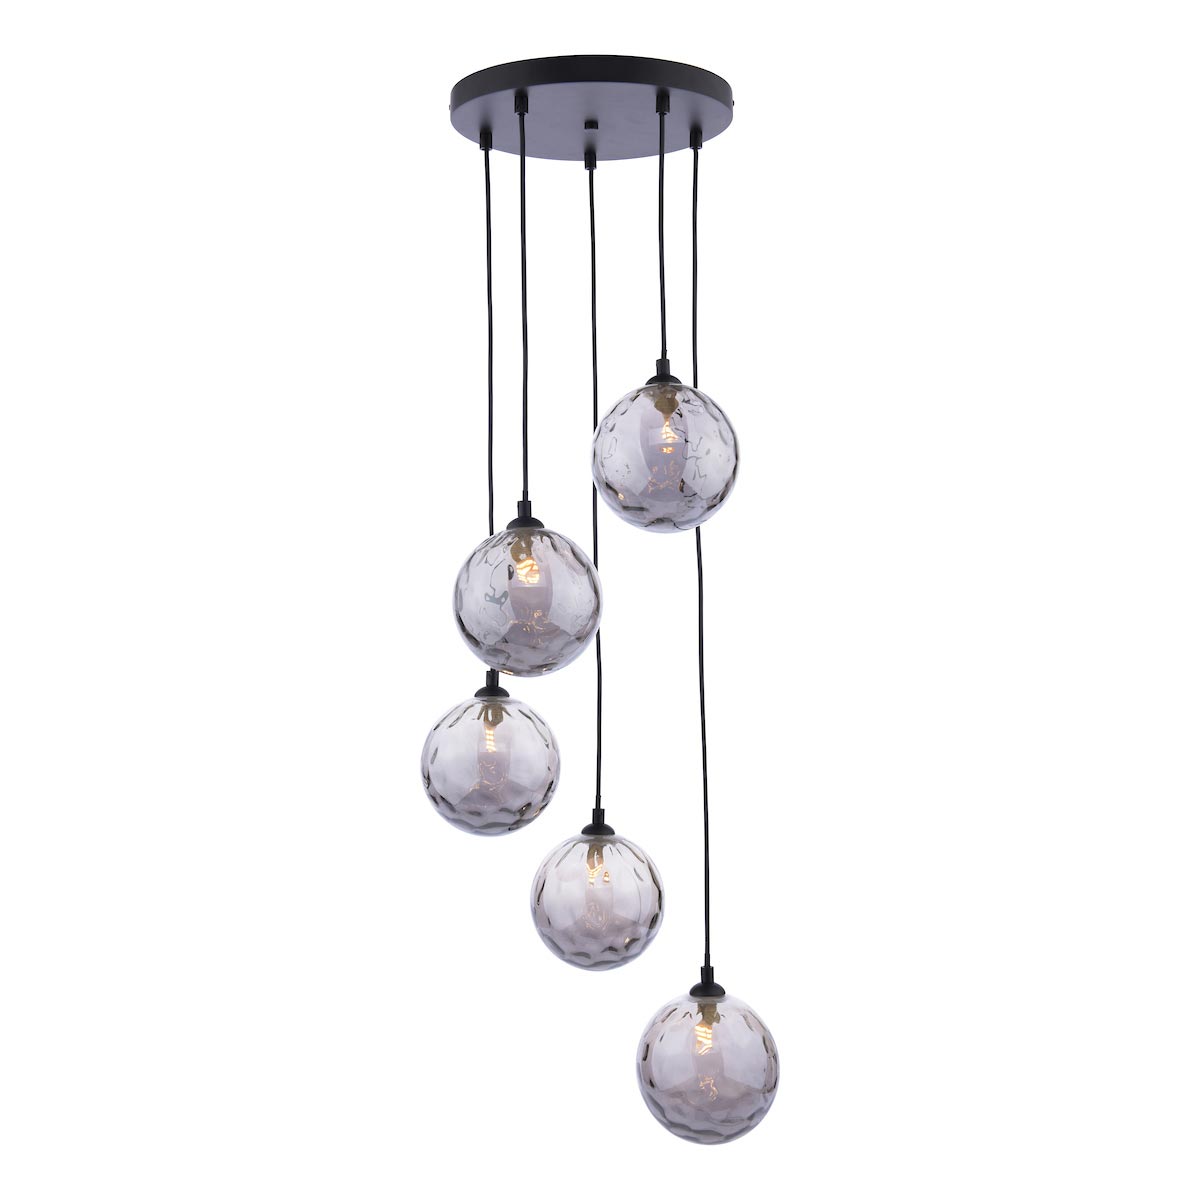 Federico 5 Light Cluster Pendant Black Dimpled Smoked Glass